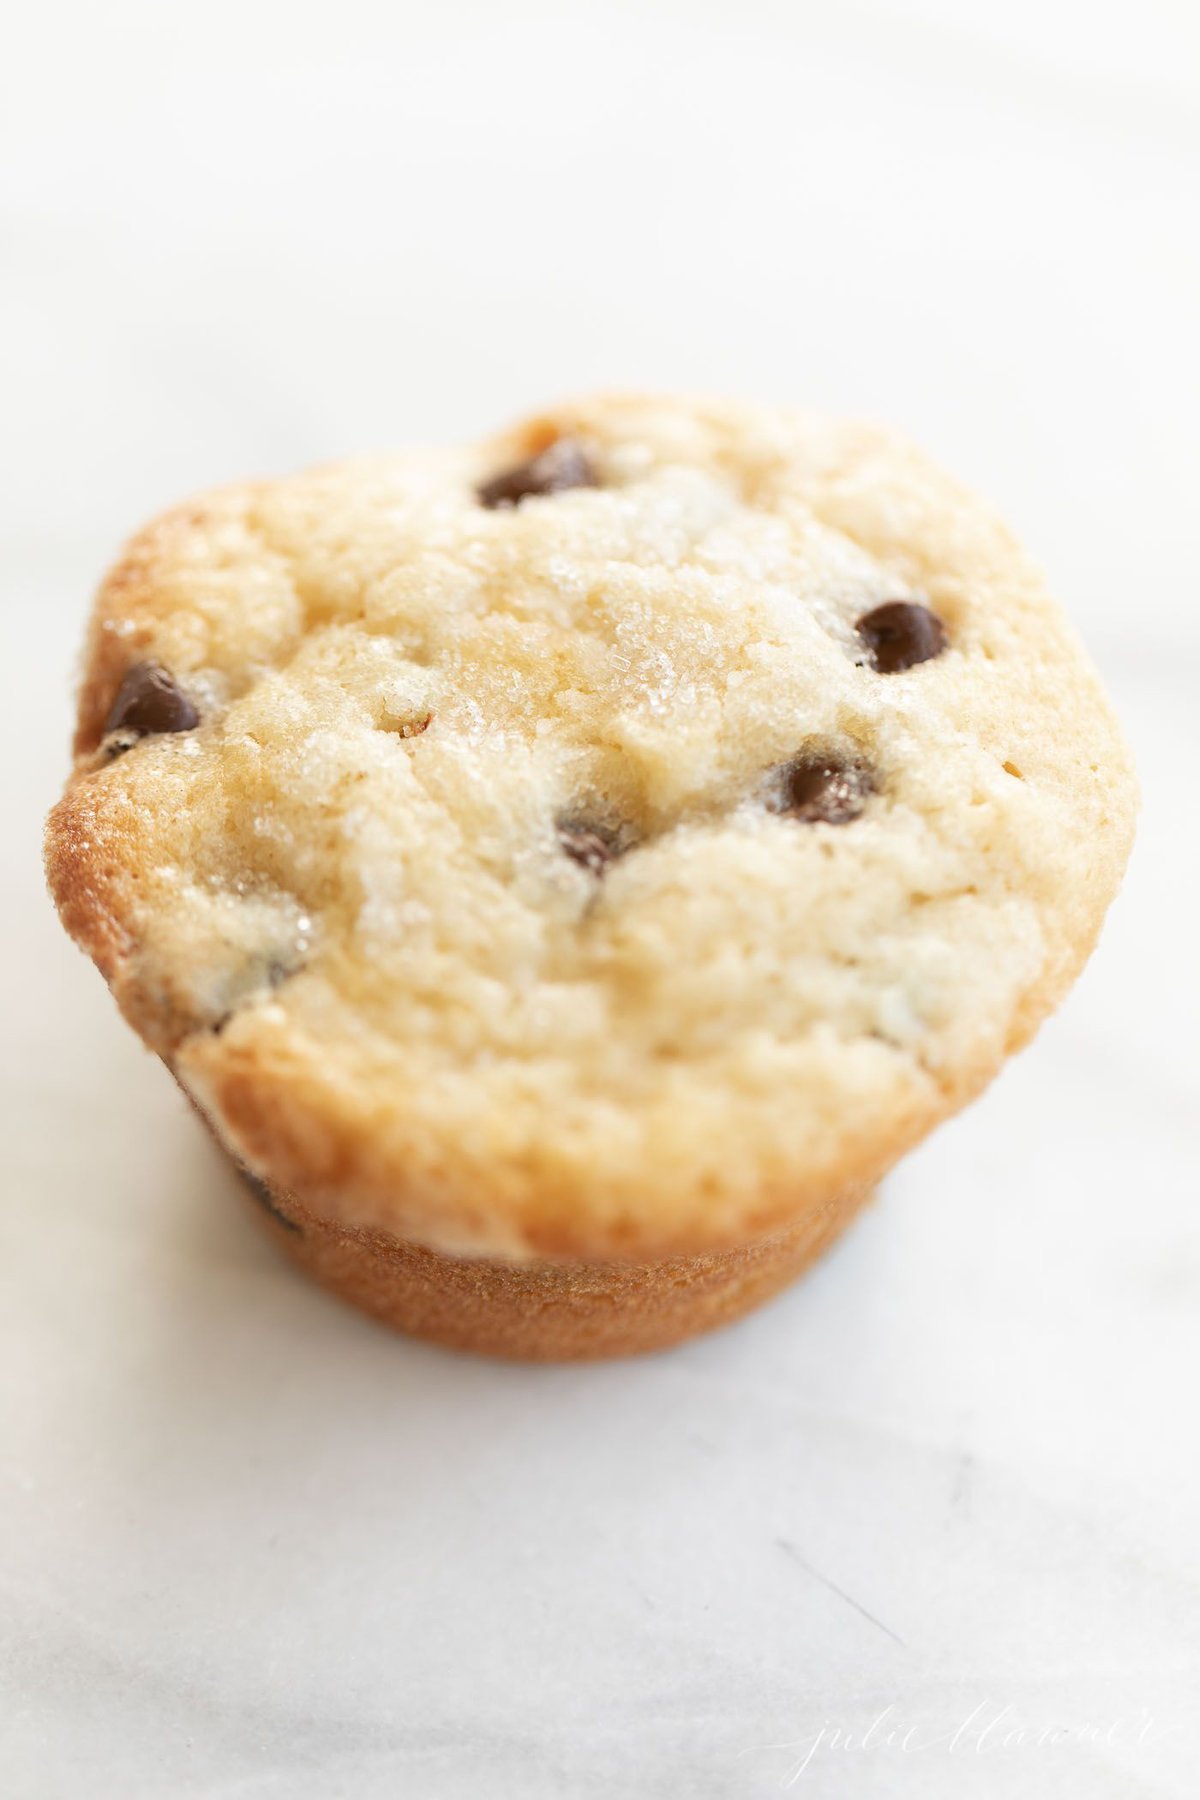 A chocolate chip muffin on a marble surface.